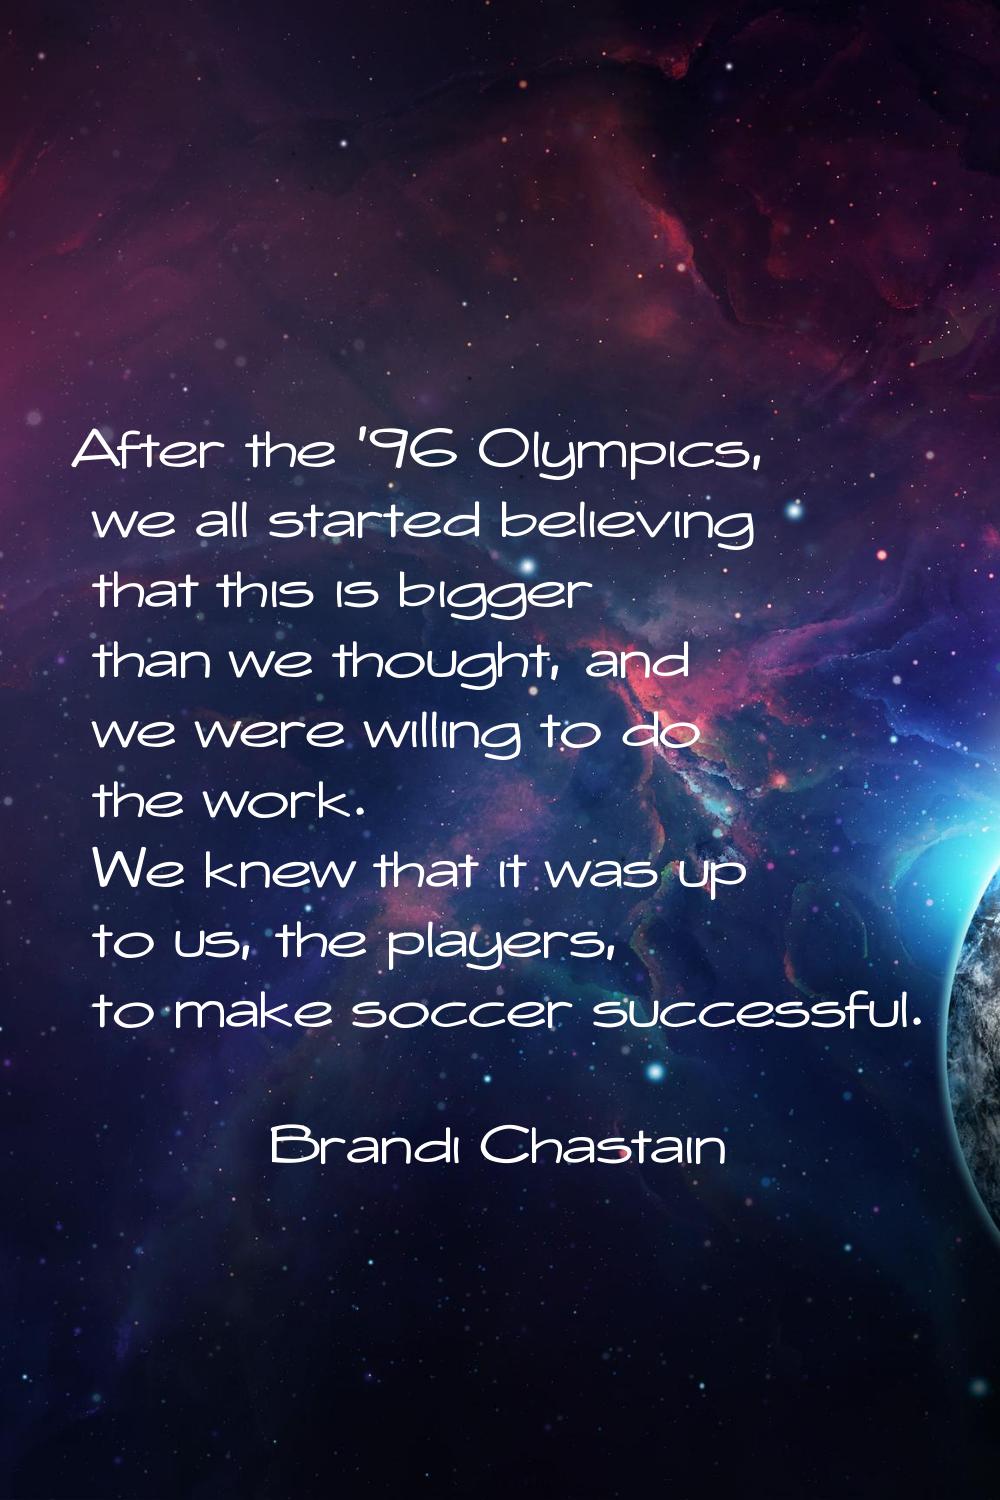 After the '96 Olympics, we all started believing that this is bigger than we thought, and we were w